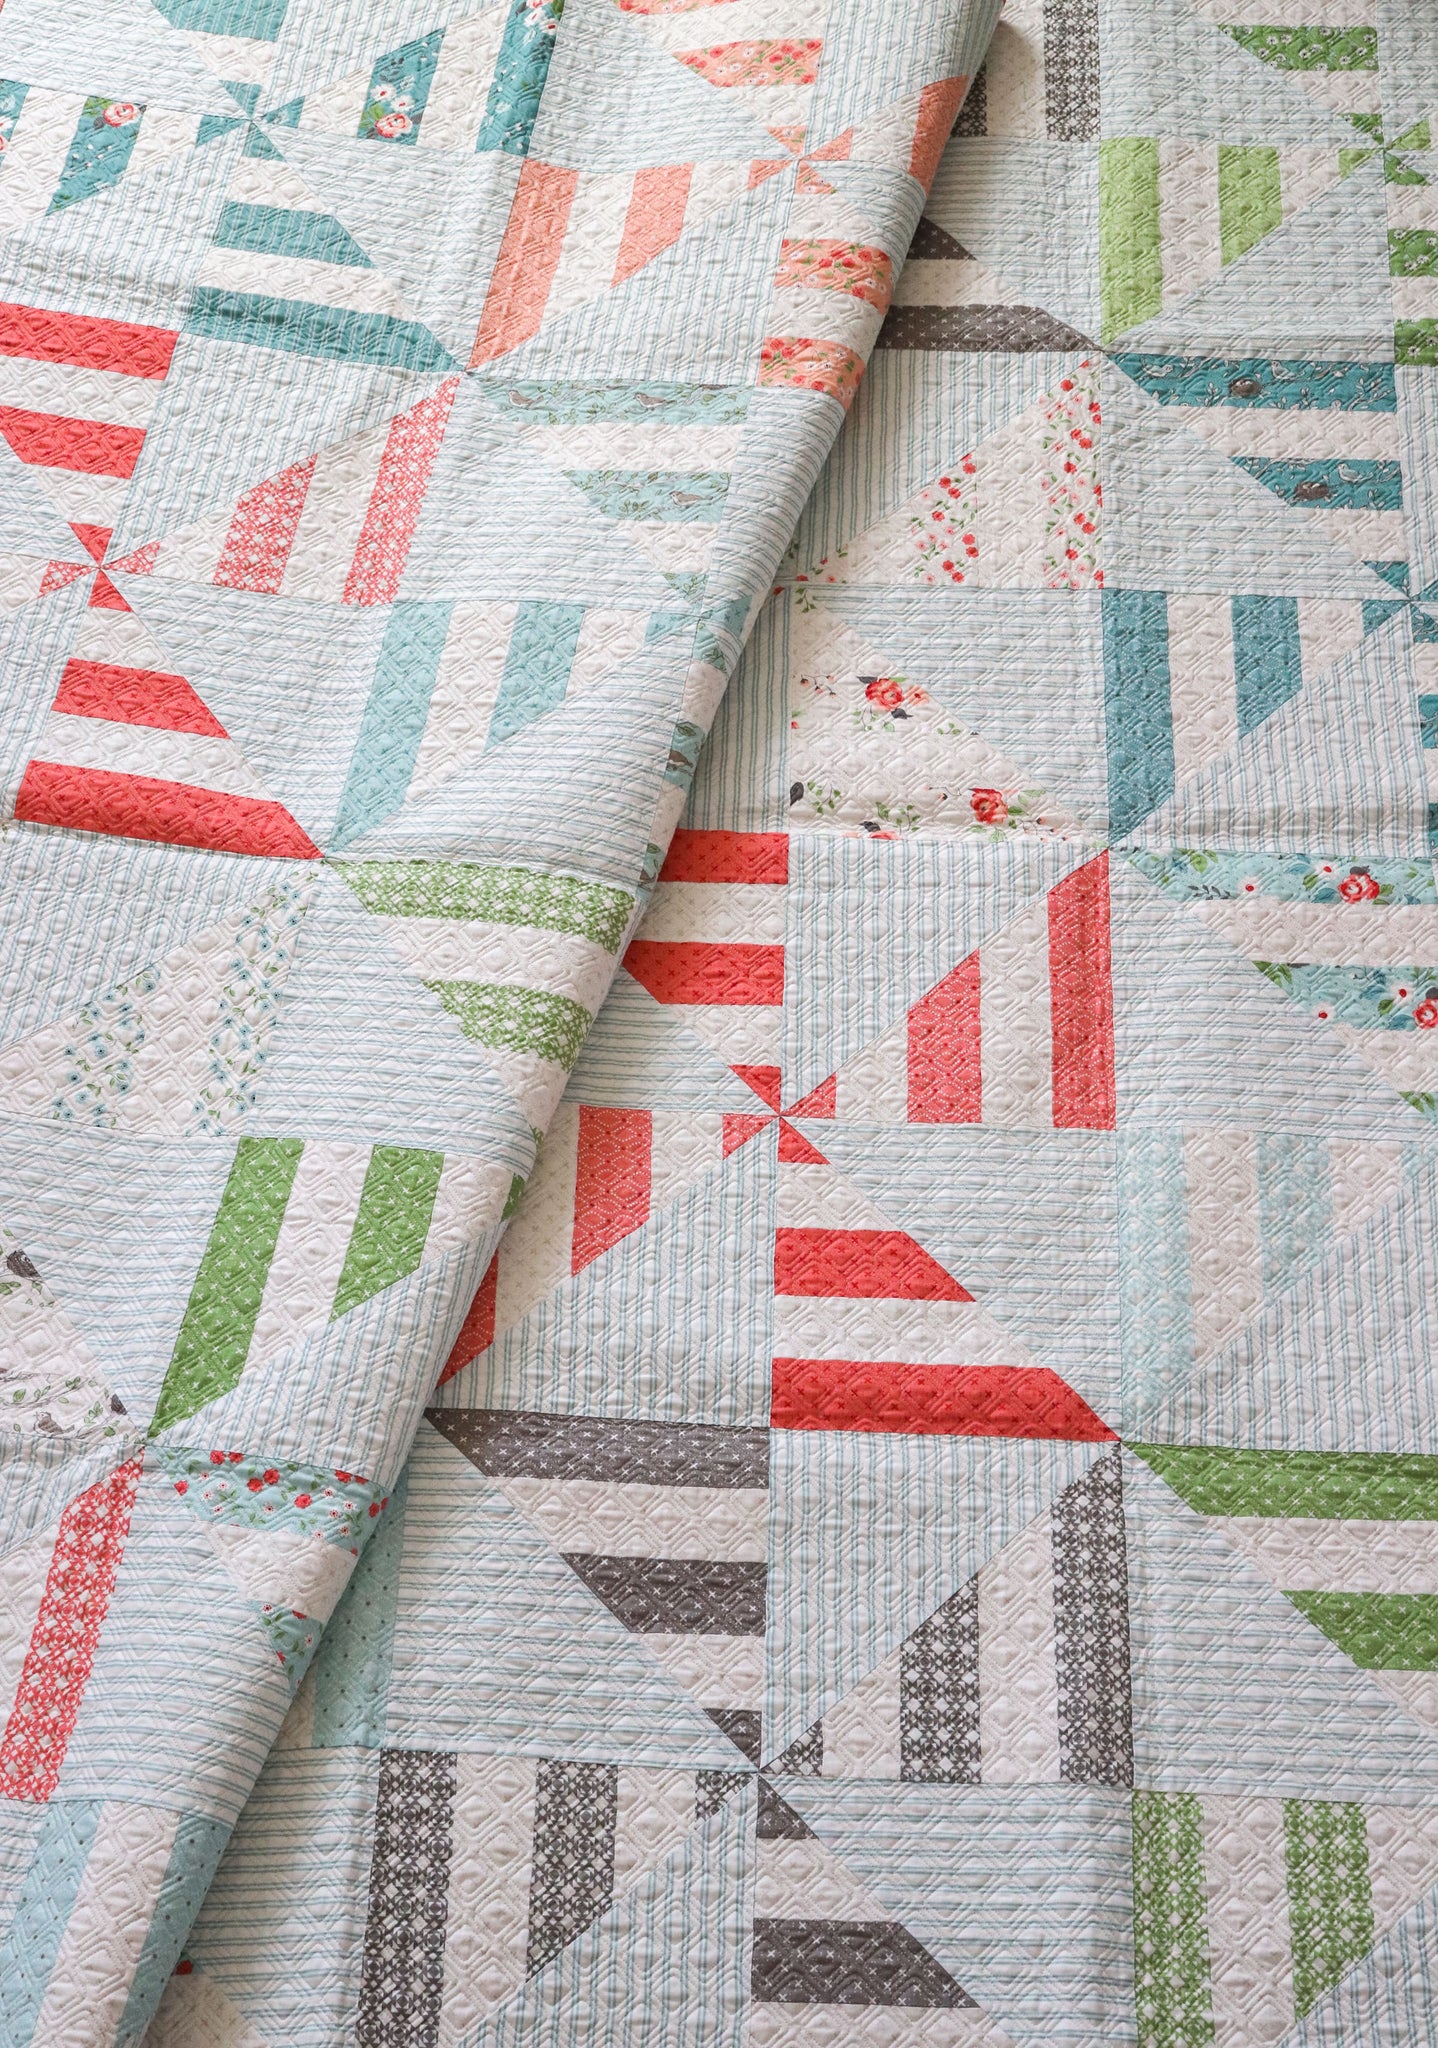 Jelly roll quilt – cakecardcloth